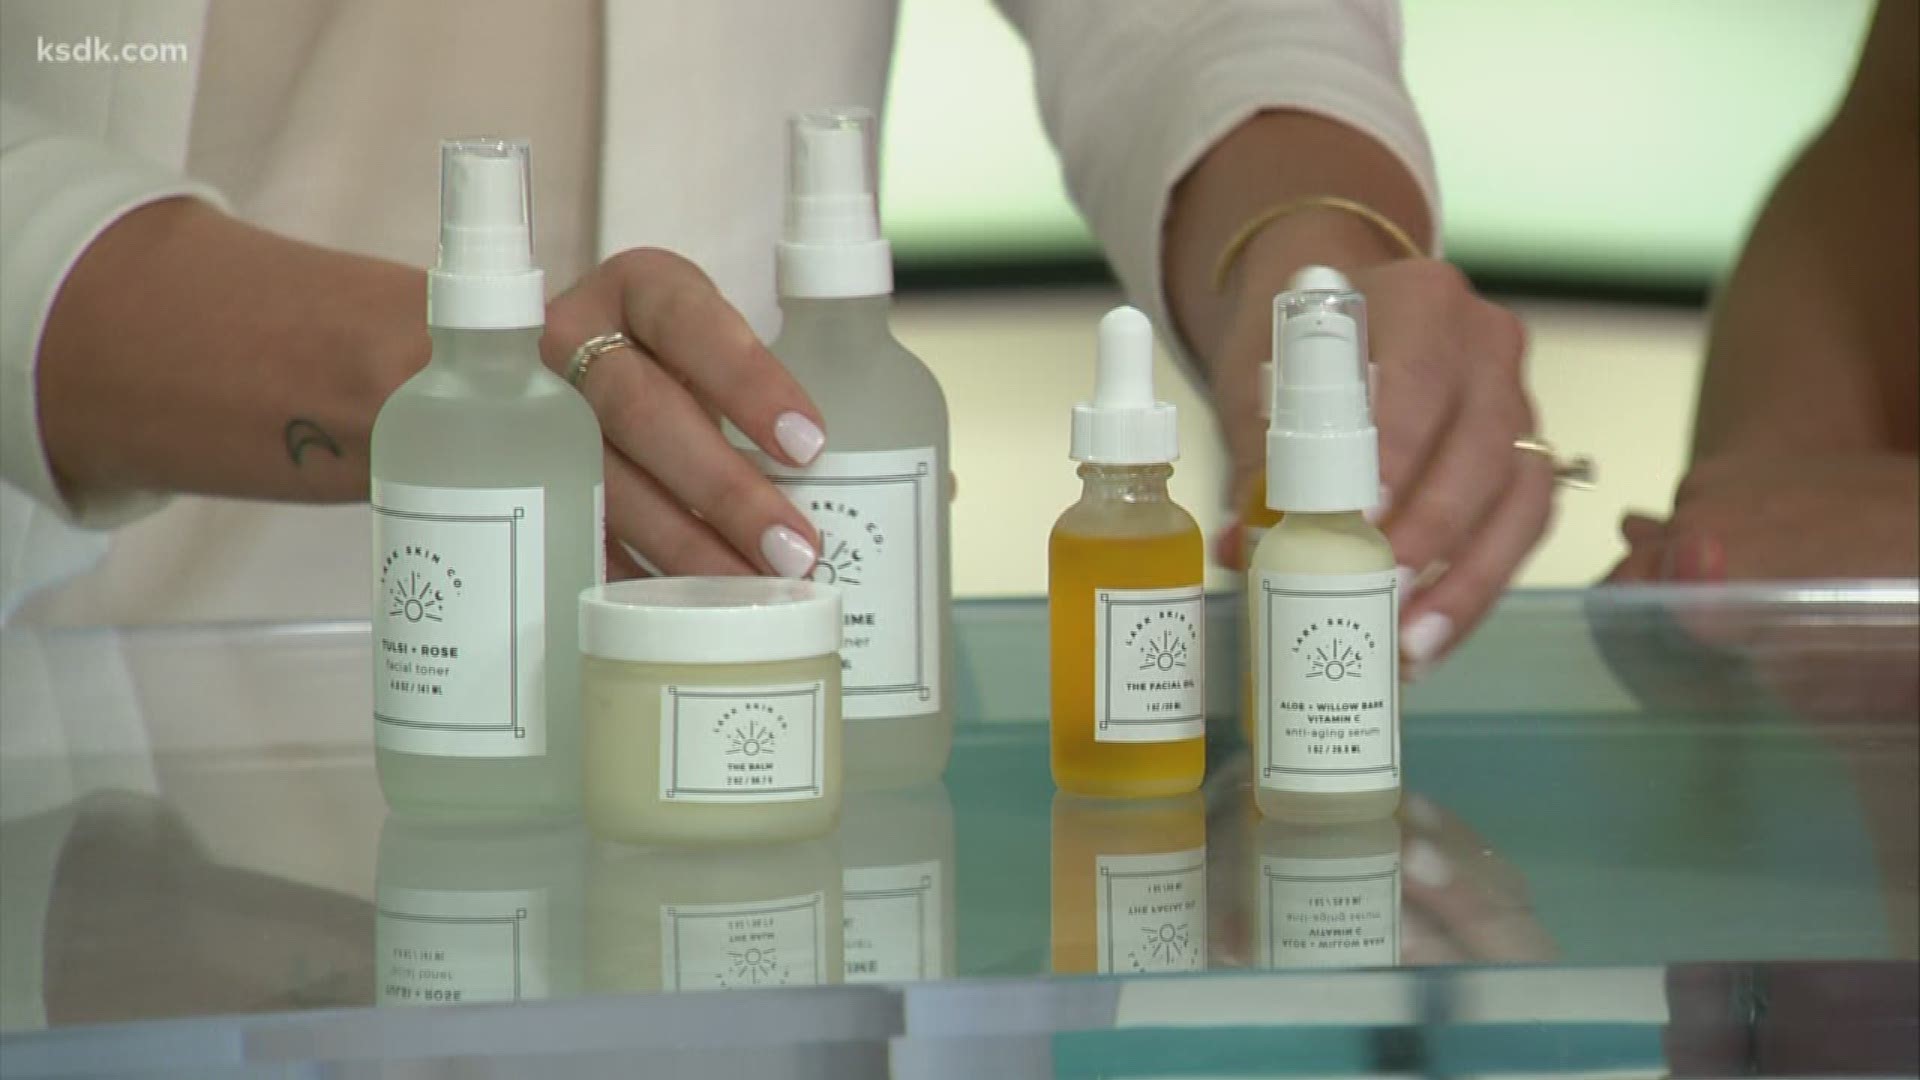 LARK Skin Co. wants to empower women to feel more confident in their own skin.